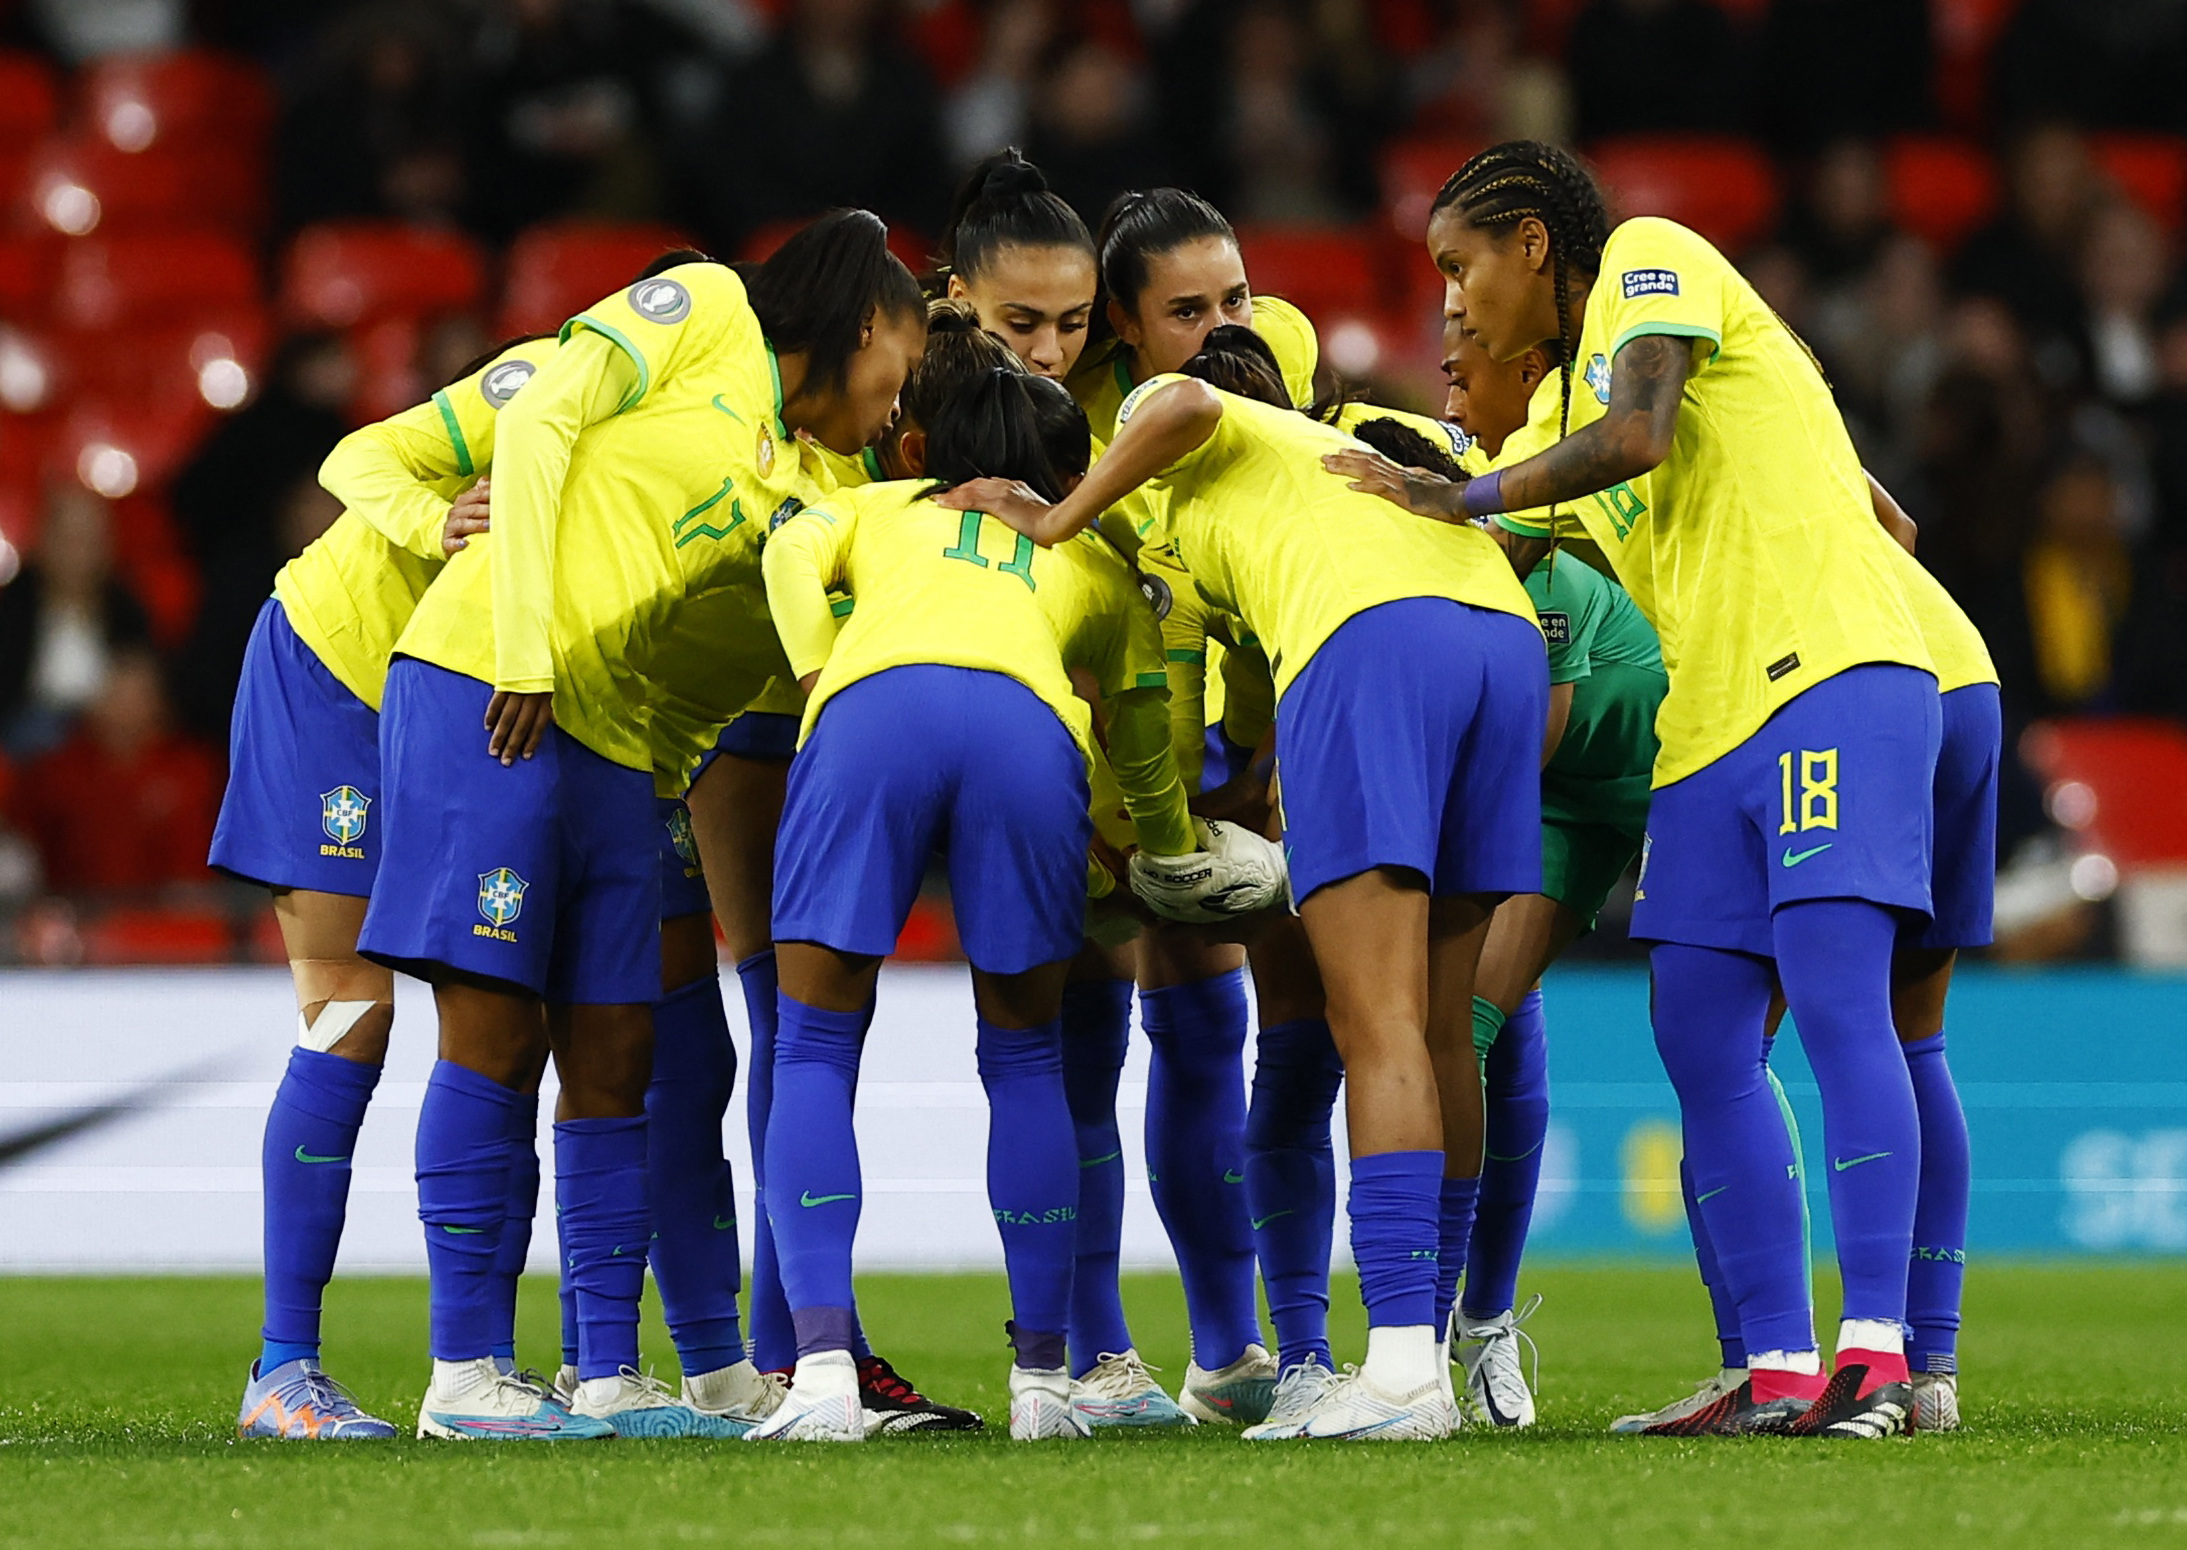 No need for excuses, Brazil changes work hours for Women's World Cup ...